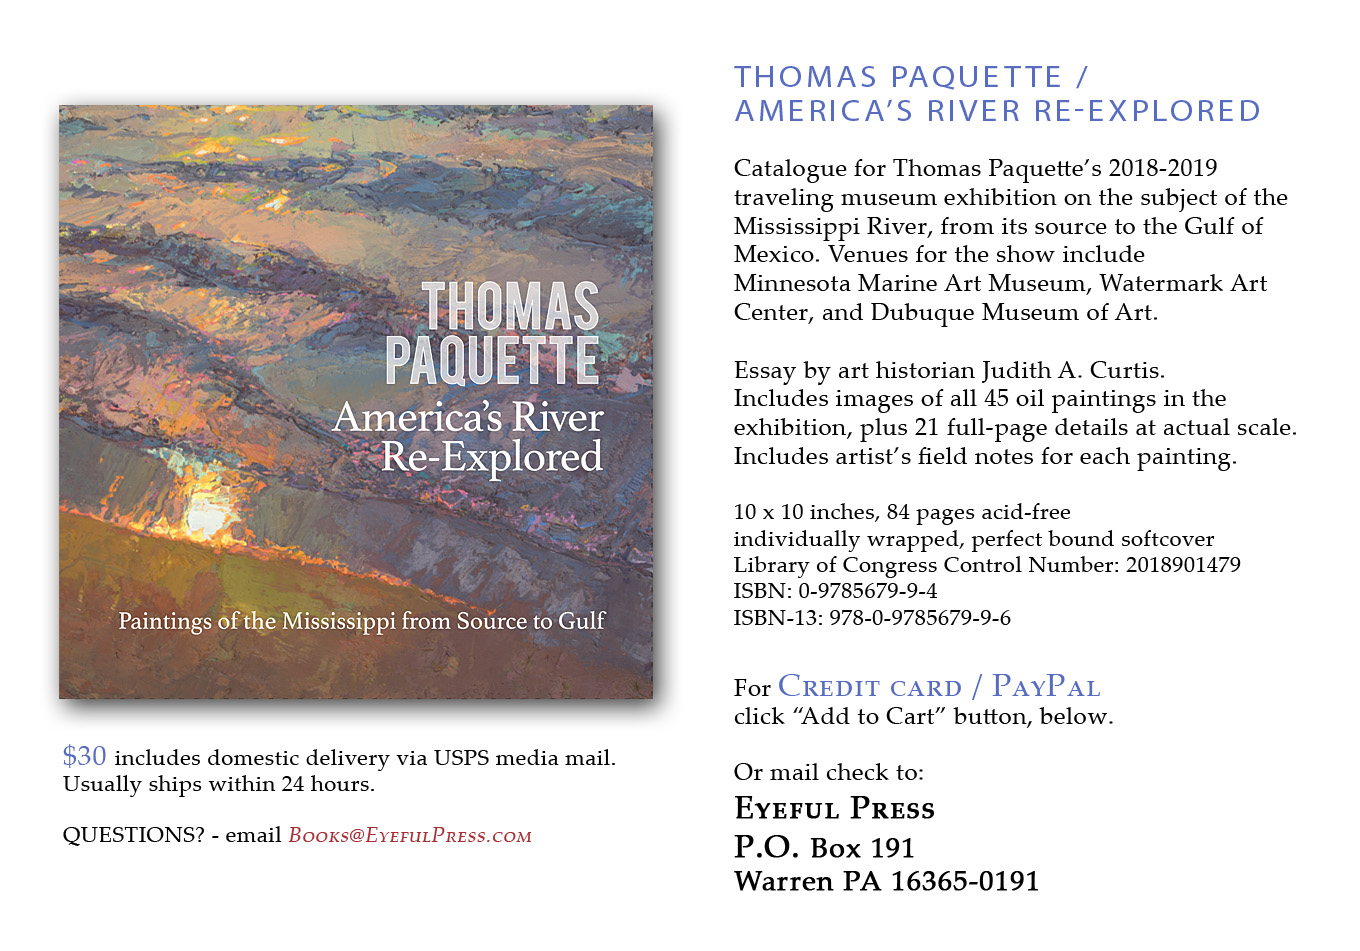 Catalogue for Thomas Paquettes 2018-2019 traveling museum exhibition on the subject of the Mississippi River, from its source to the Gulf of Mexico. Venues for the show include Minnesota Marine Art Museum, Watermark Art Center, and Dubuque Museum of Art. Essay by art historian Judith A. Curtis. Includes images of all 45 oil paintings in the exhibition, plus 21 full-page details at actual scale. 